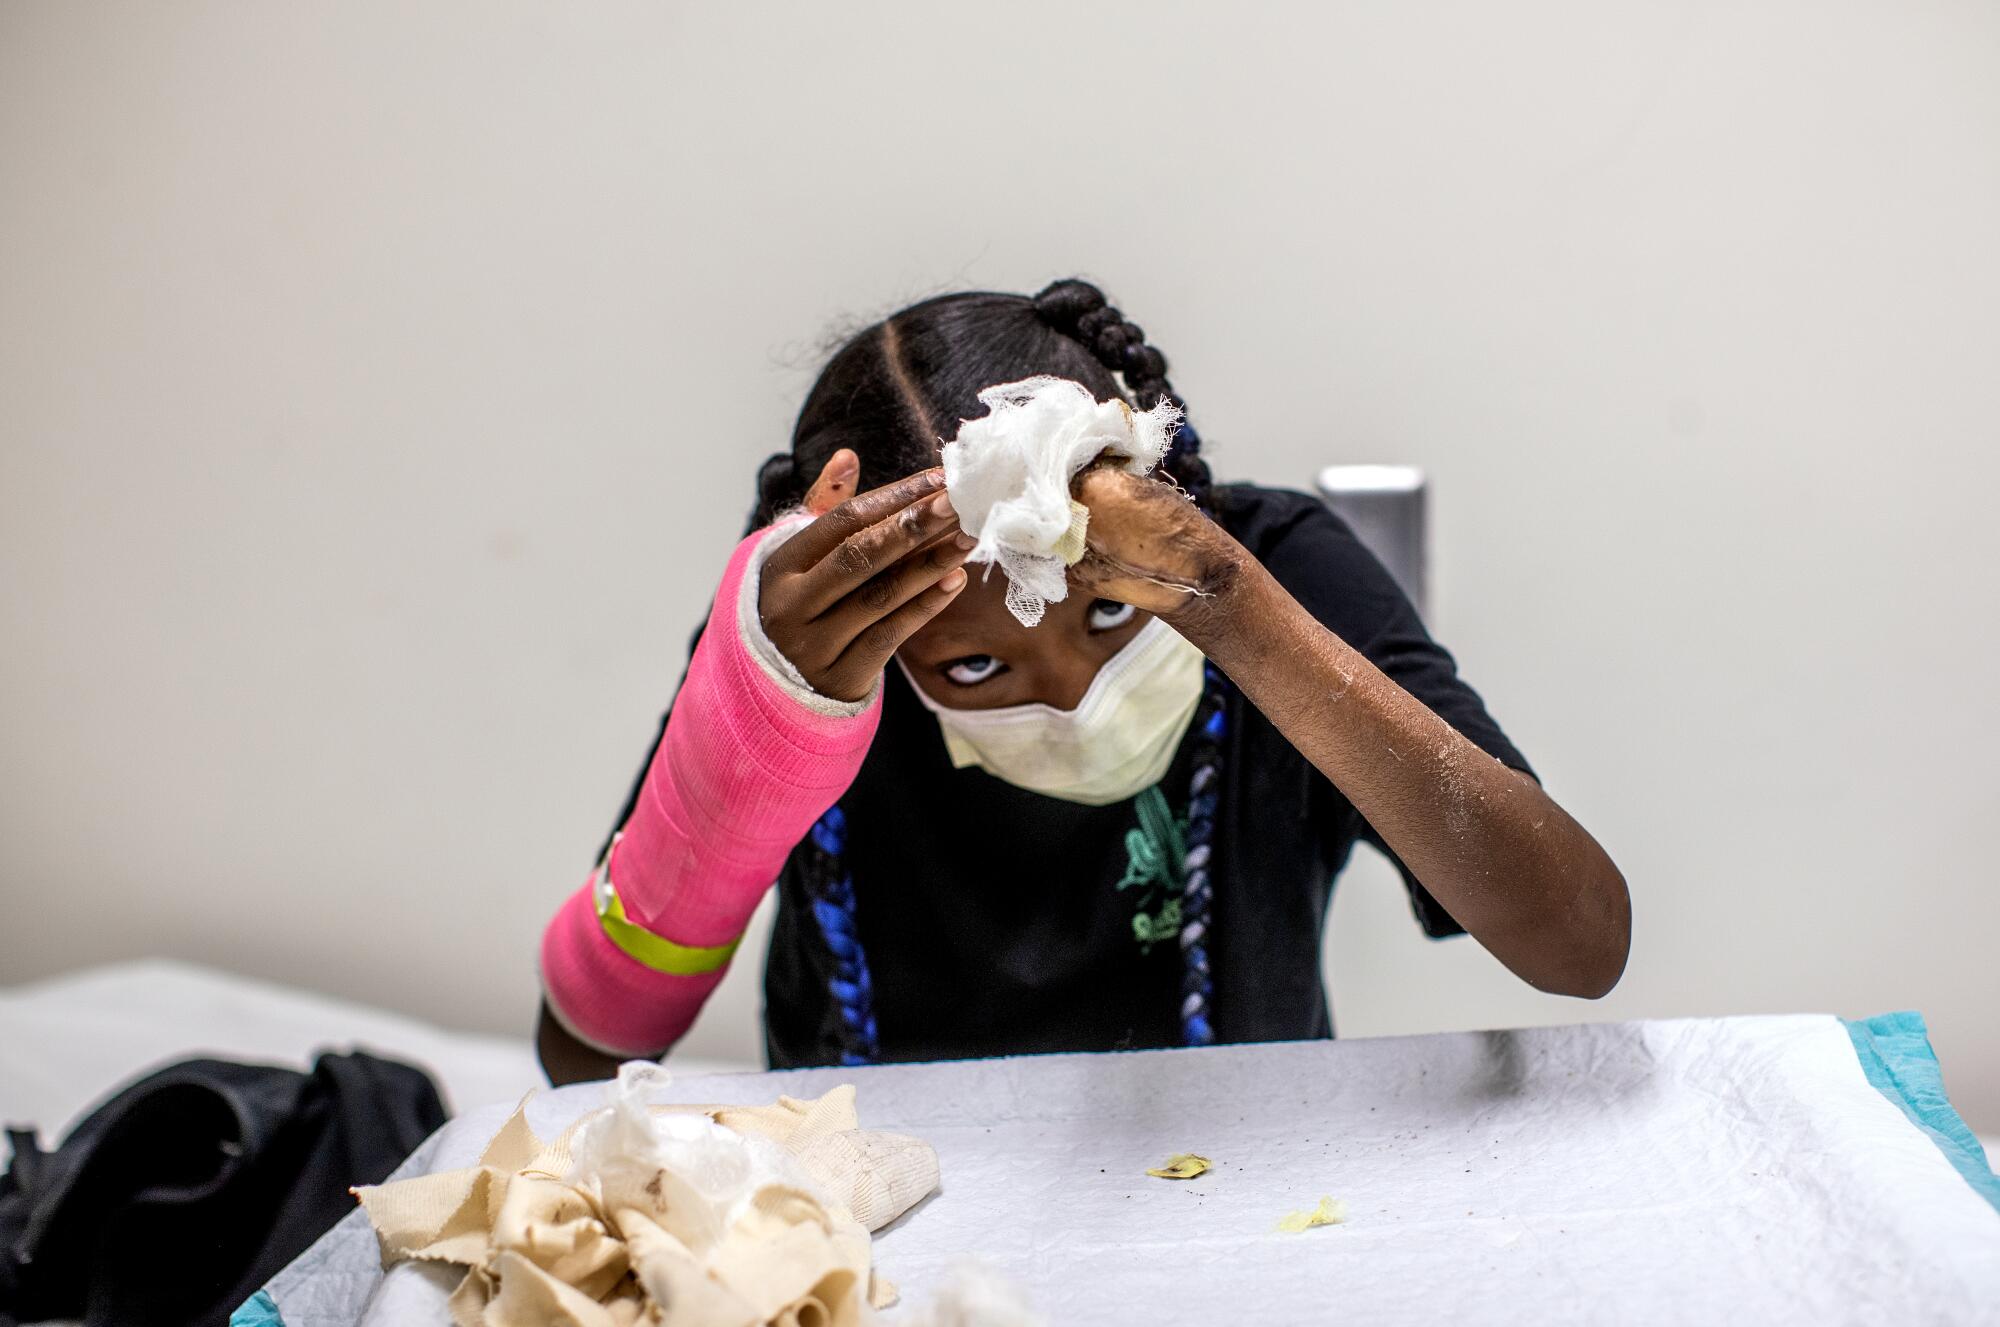 La'Veyah Mosley, 12, of Los Angeles looks at the damage to her left hand during a doctors appointment